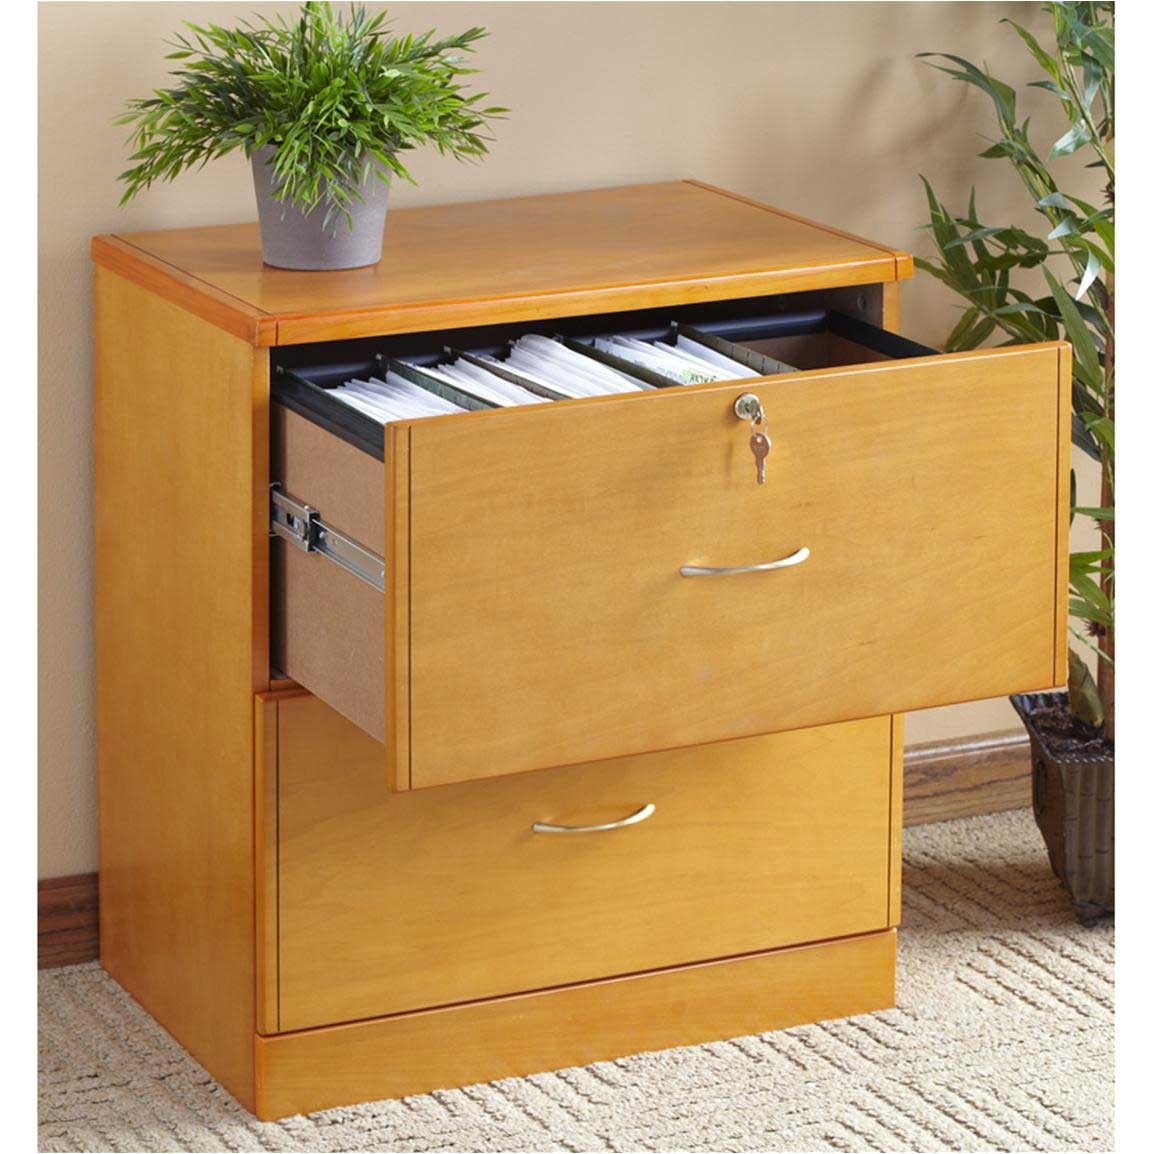 small wood filing cabinet vintage filing cabinet walmart file cabinet file cabinet smoker